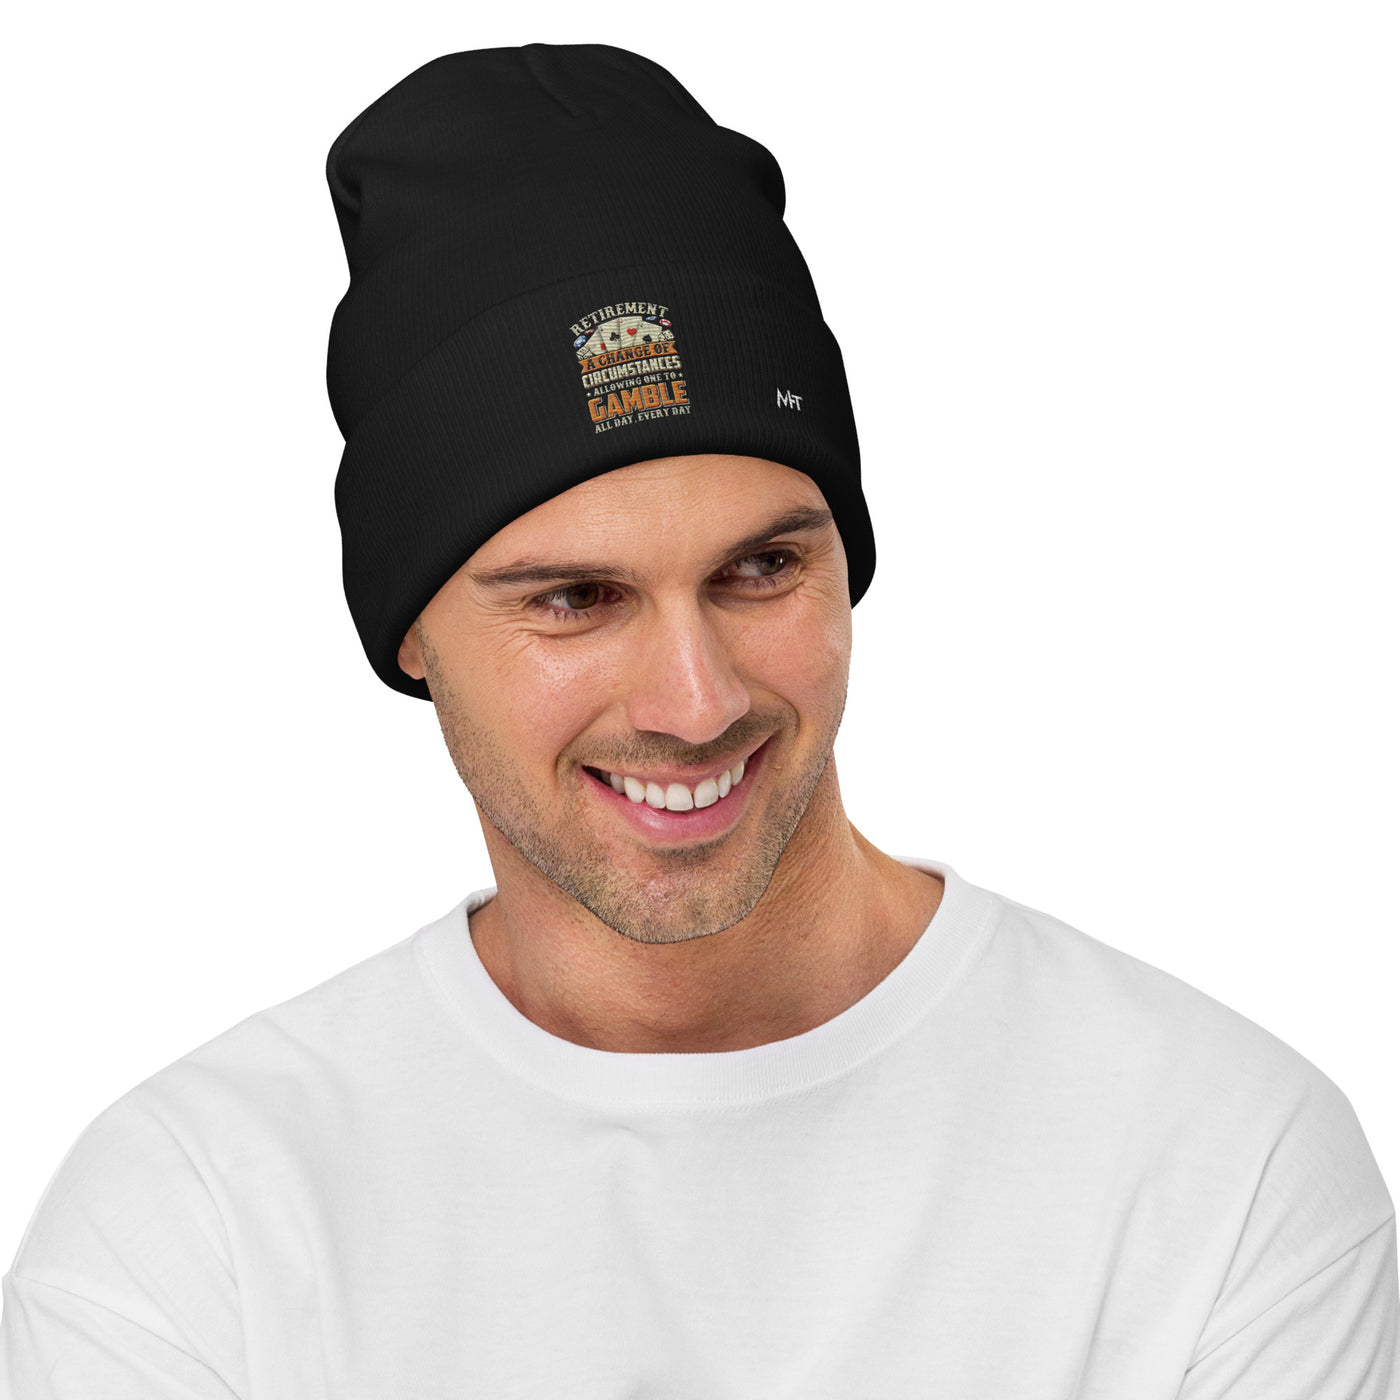 Retirement ; a Change of Circumstance allowing One to Gamble all day everyday - Embroidered Beanie